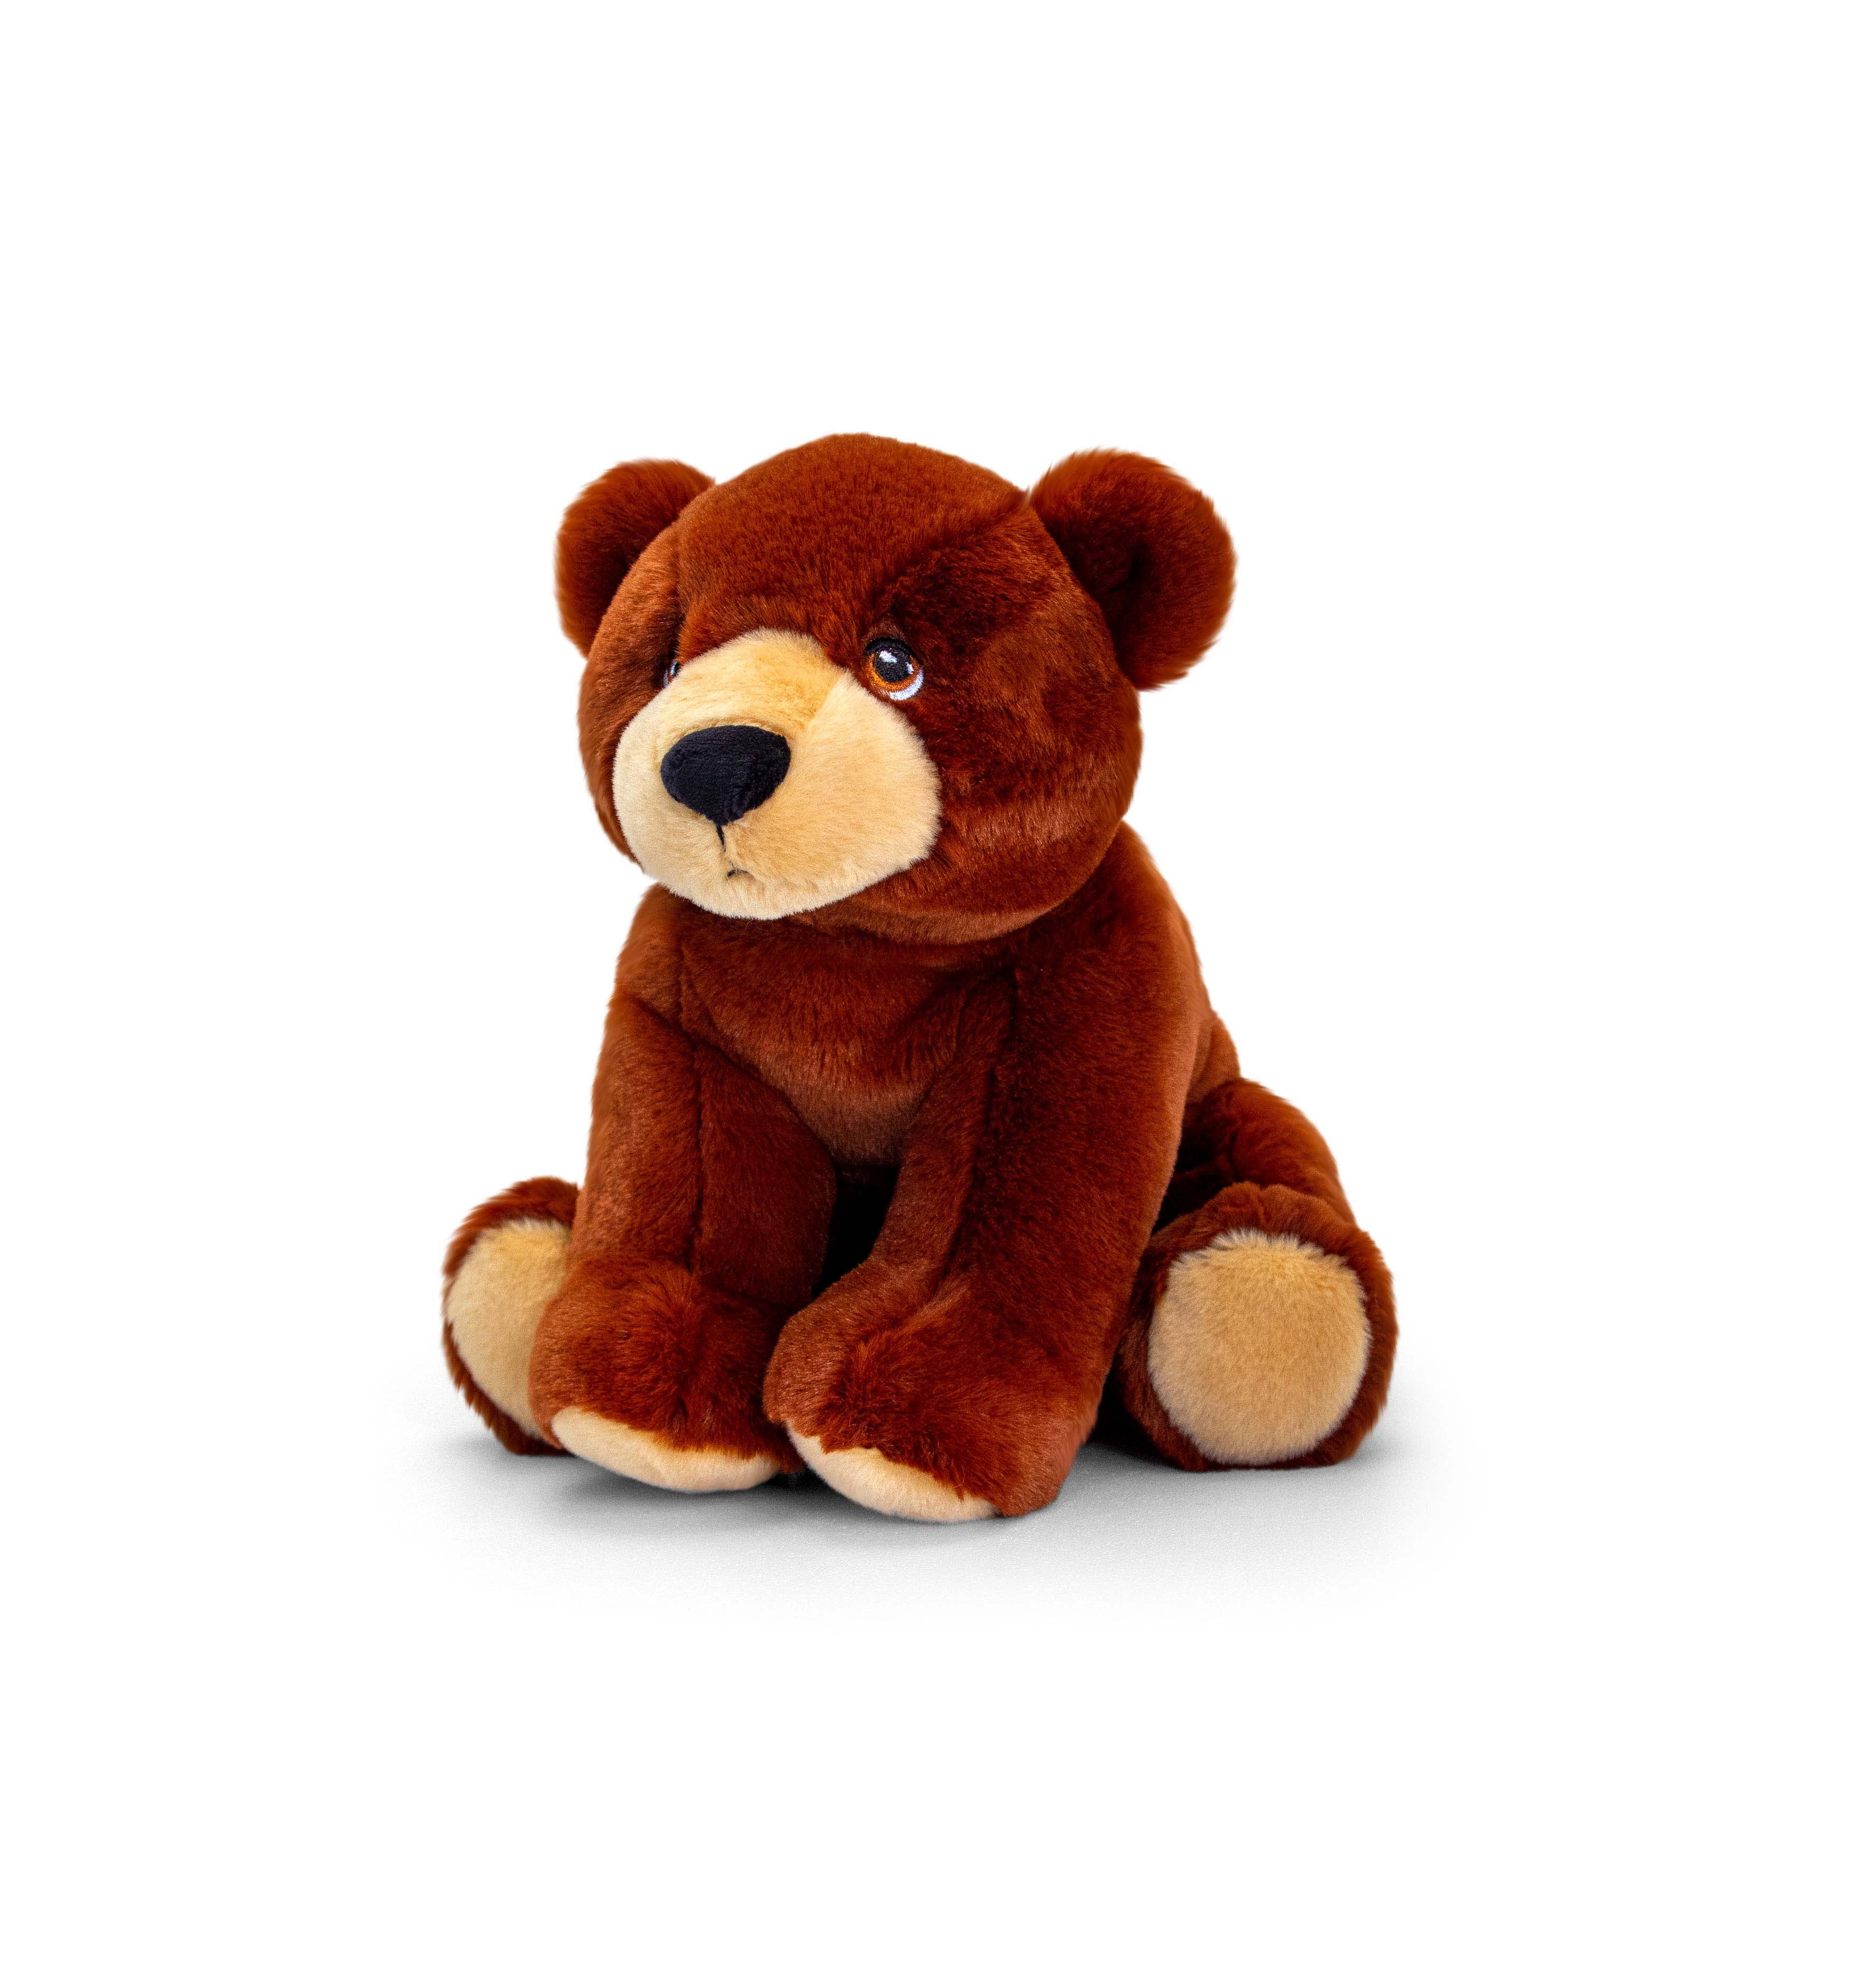 Brown Bear Recycled Plastic Soft Toy, 18cm - small cuddly toy for young children